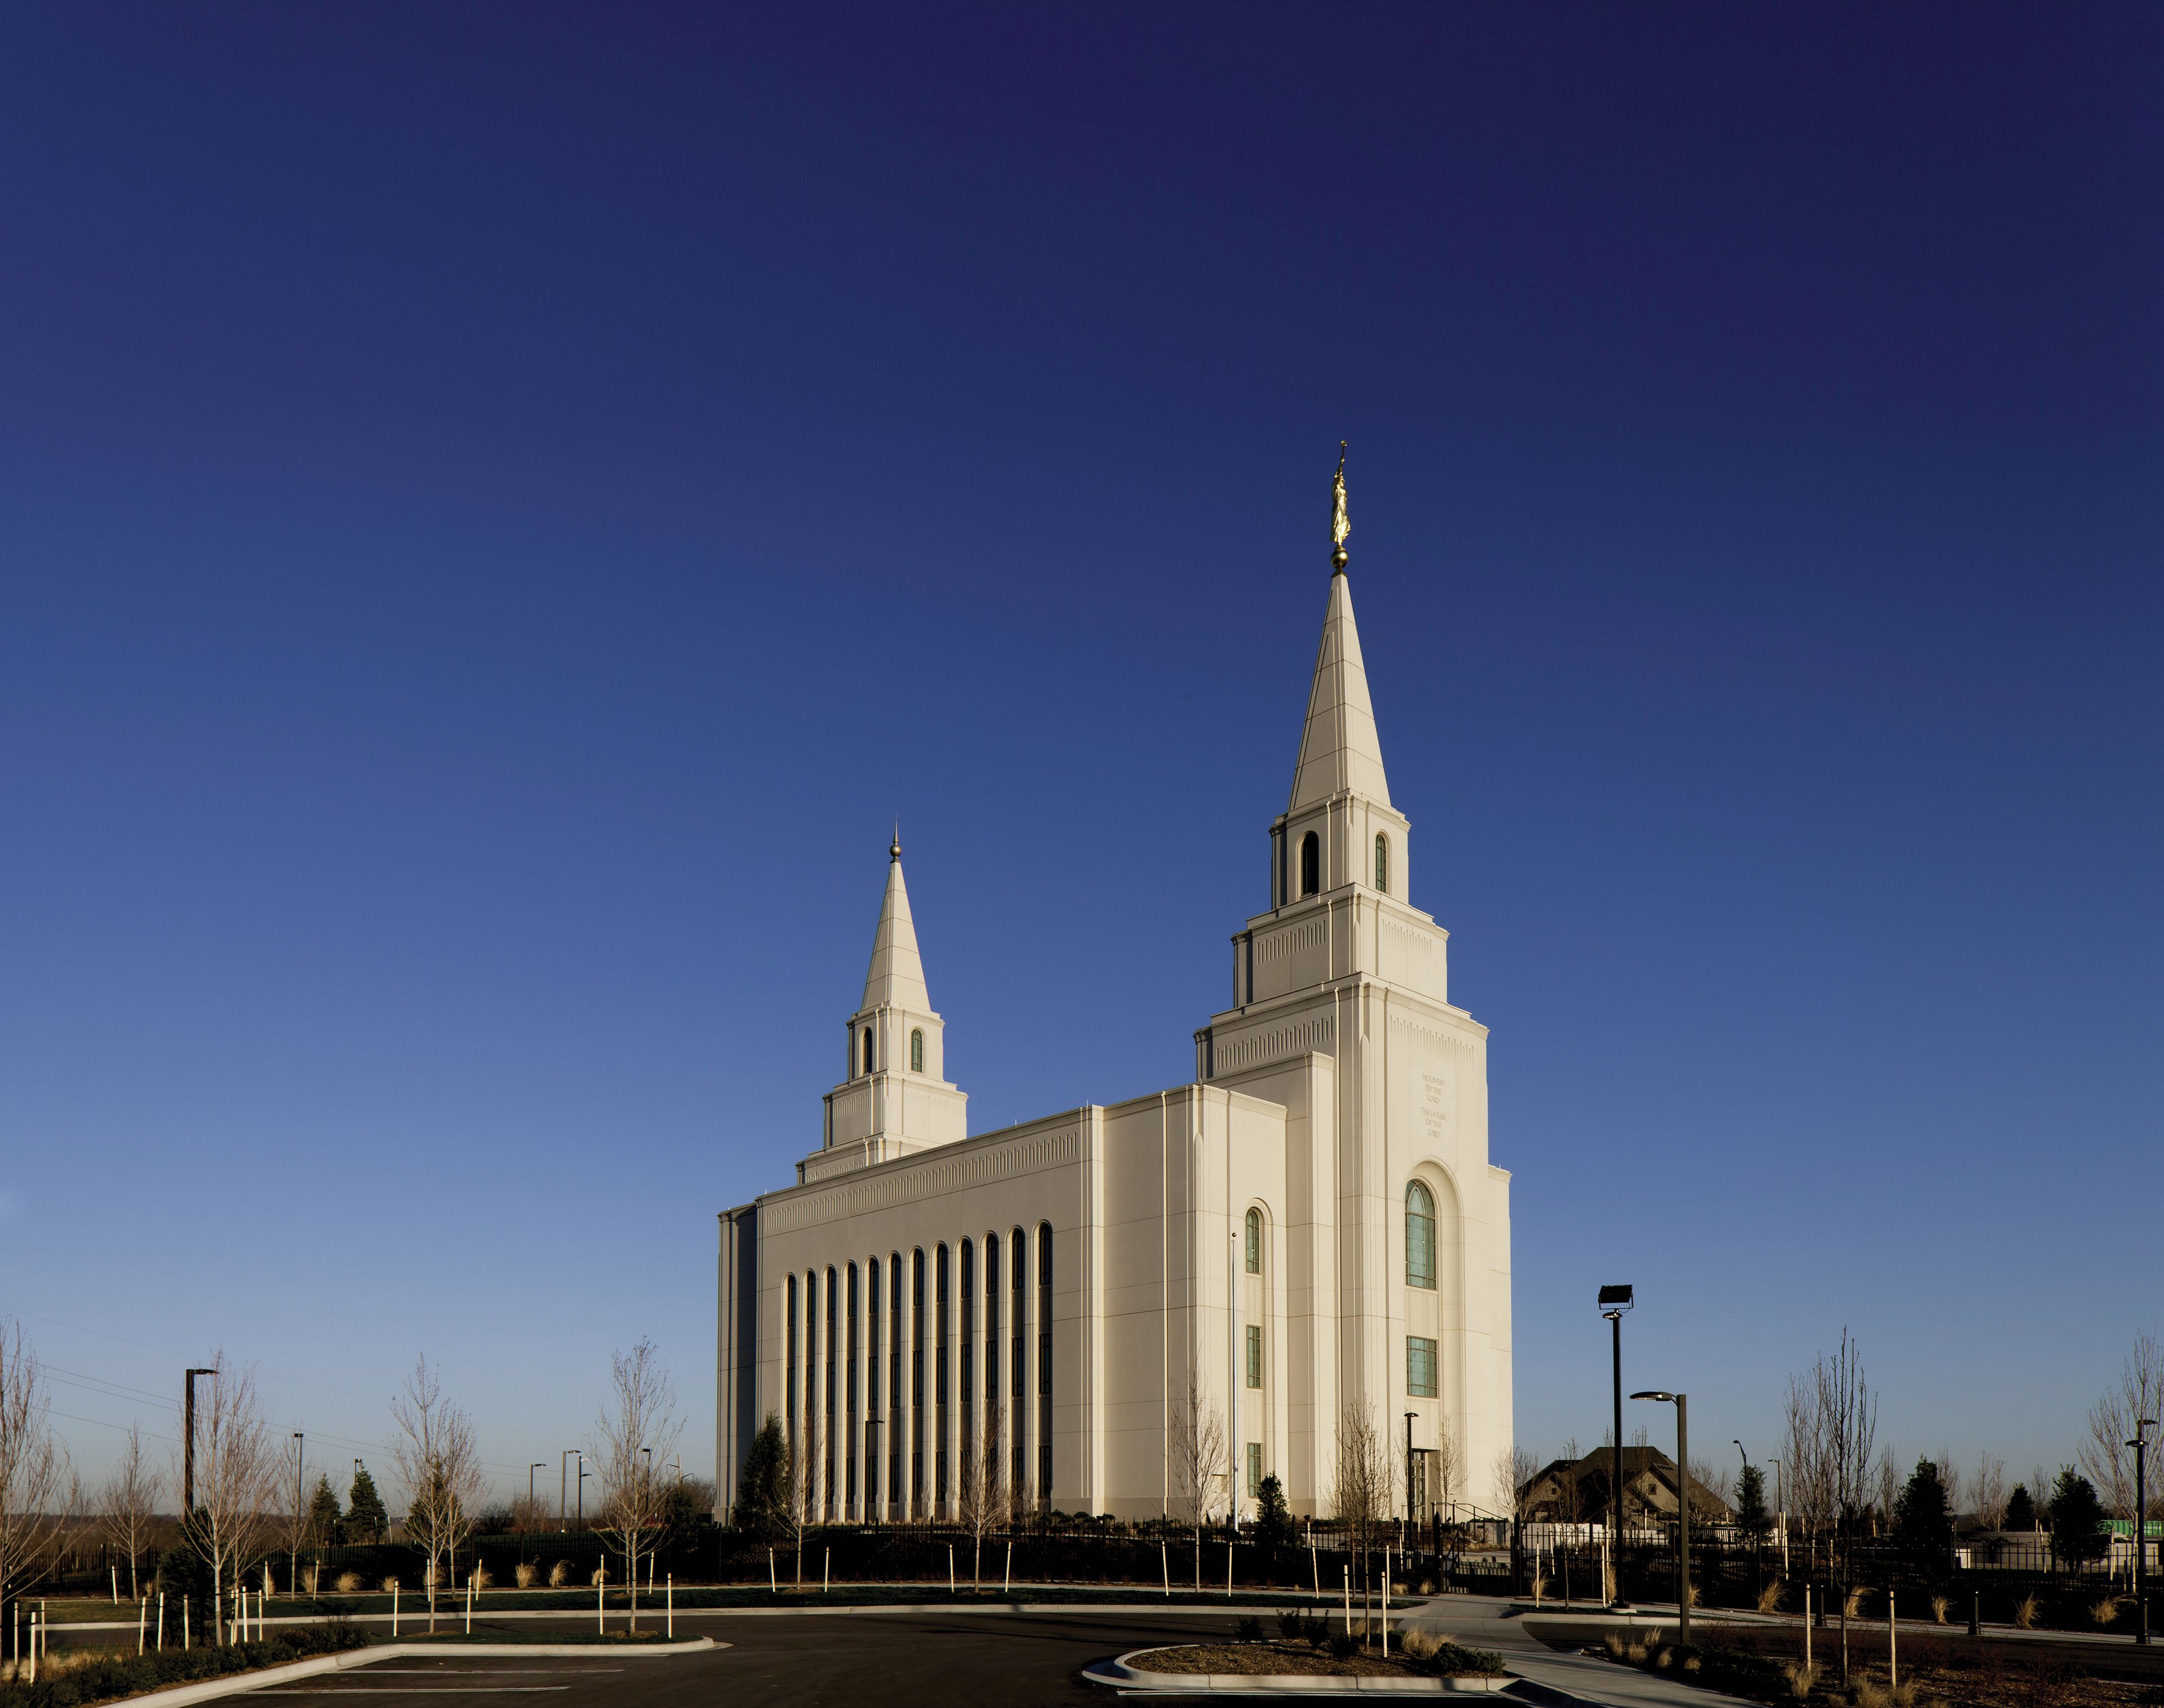 A view of the Kansas City Missouri Temple from the grounds.